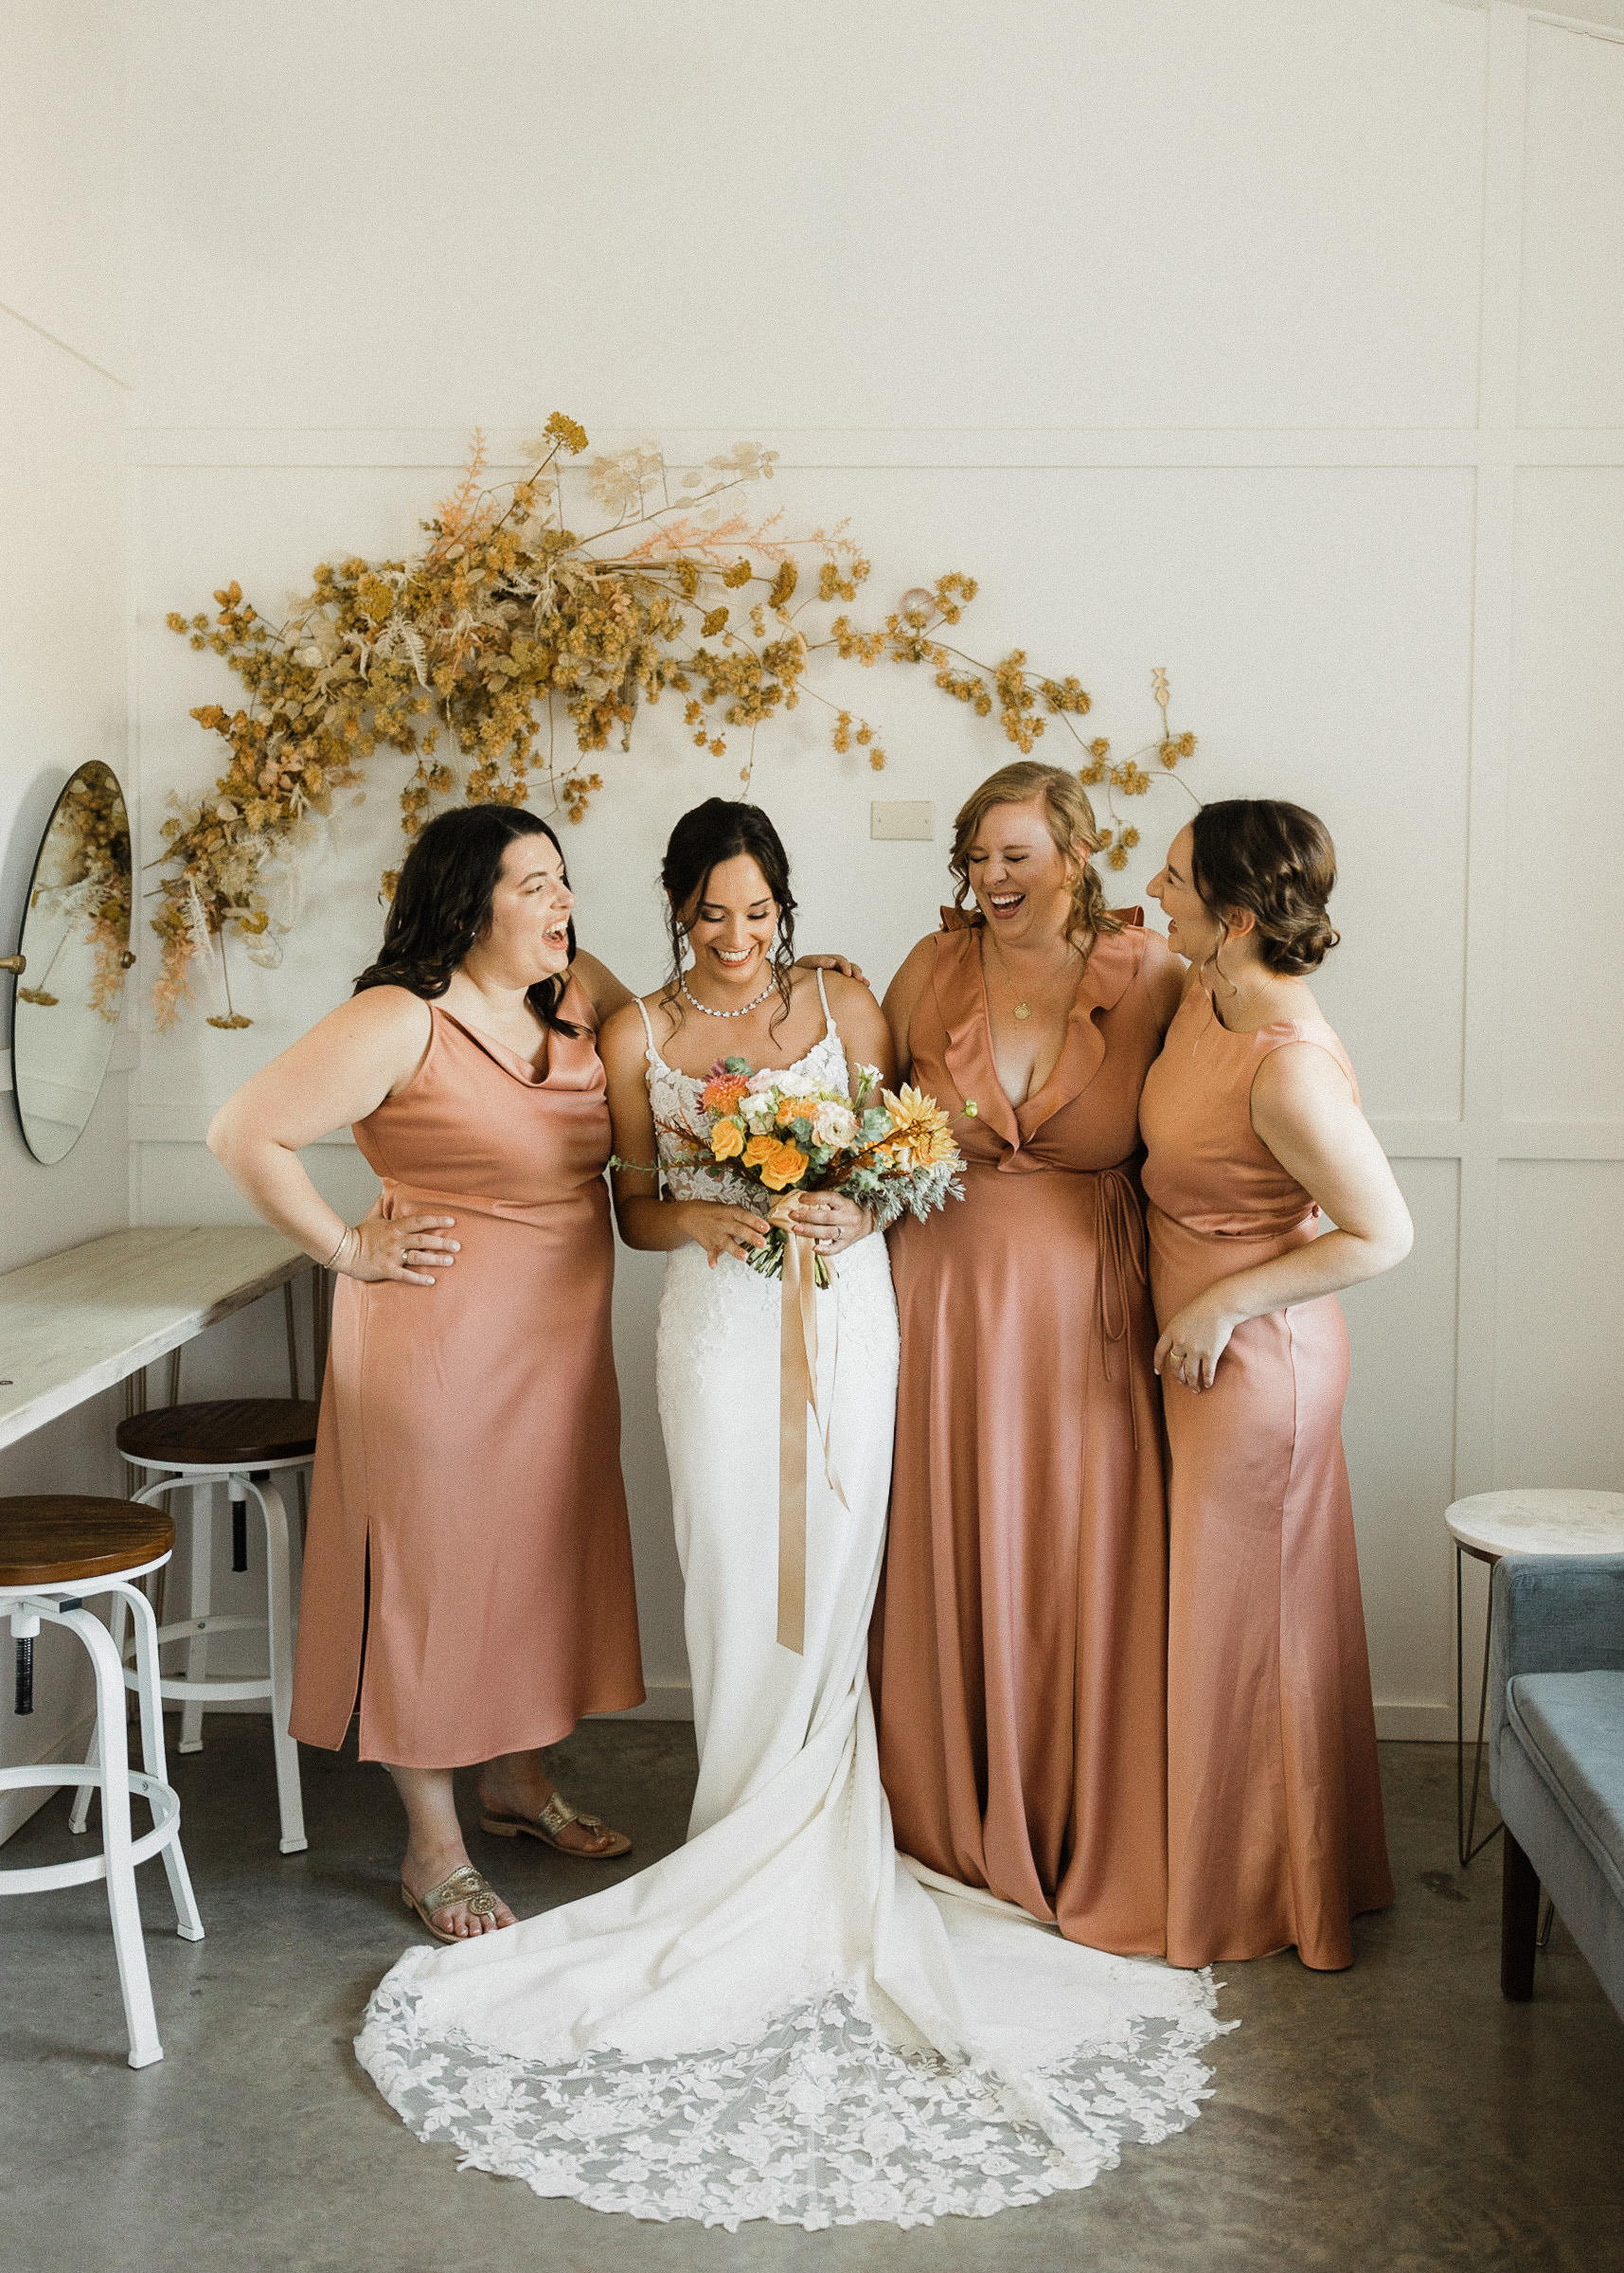 Bride and bridesmaids laugh together in a bridal suite